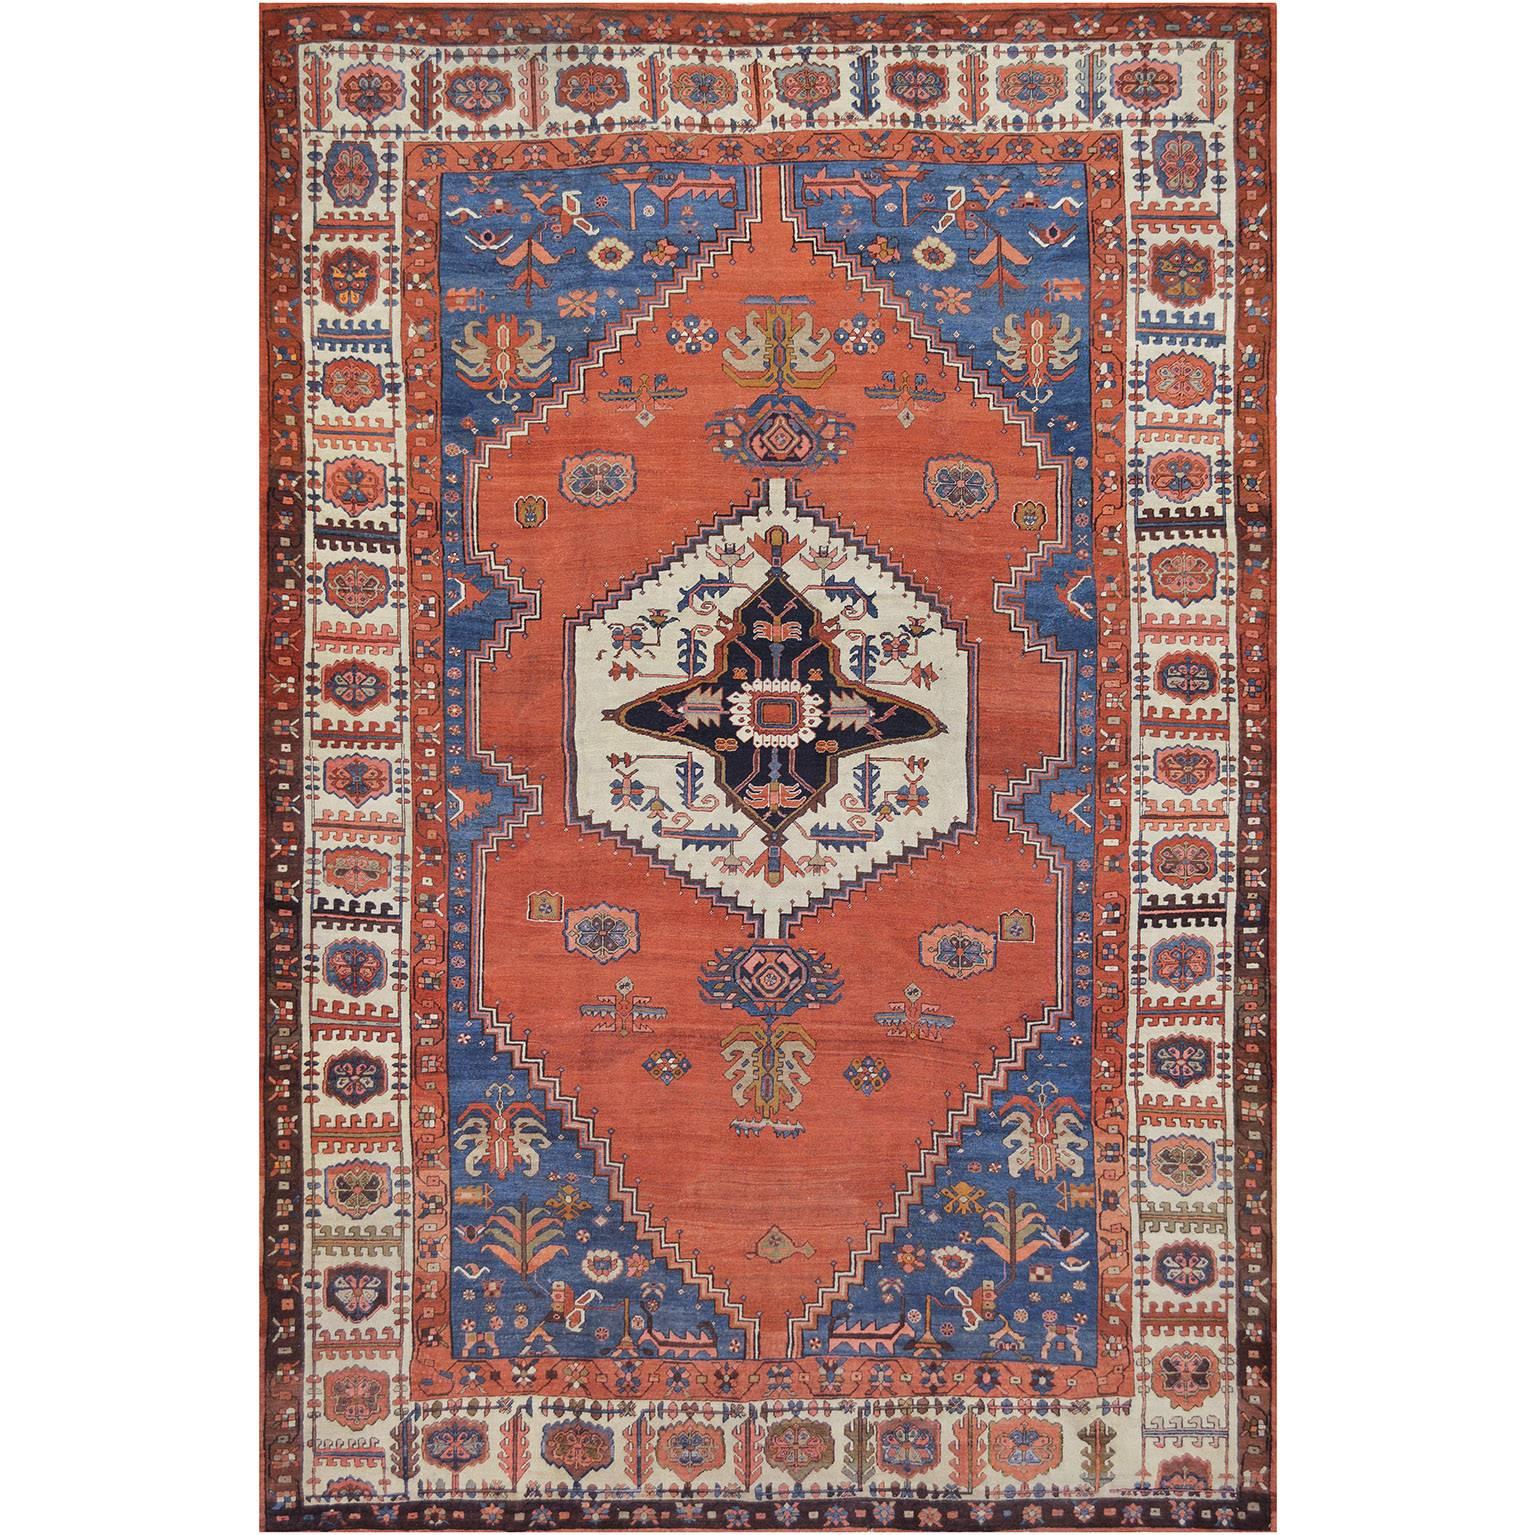 Late 19th Century Heriz Rug from North West Persia